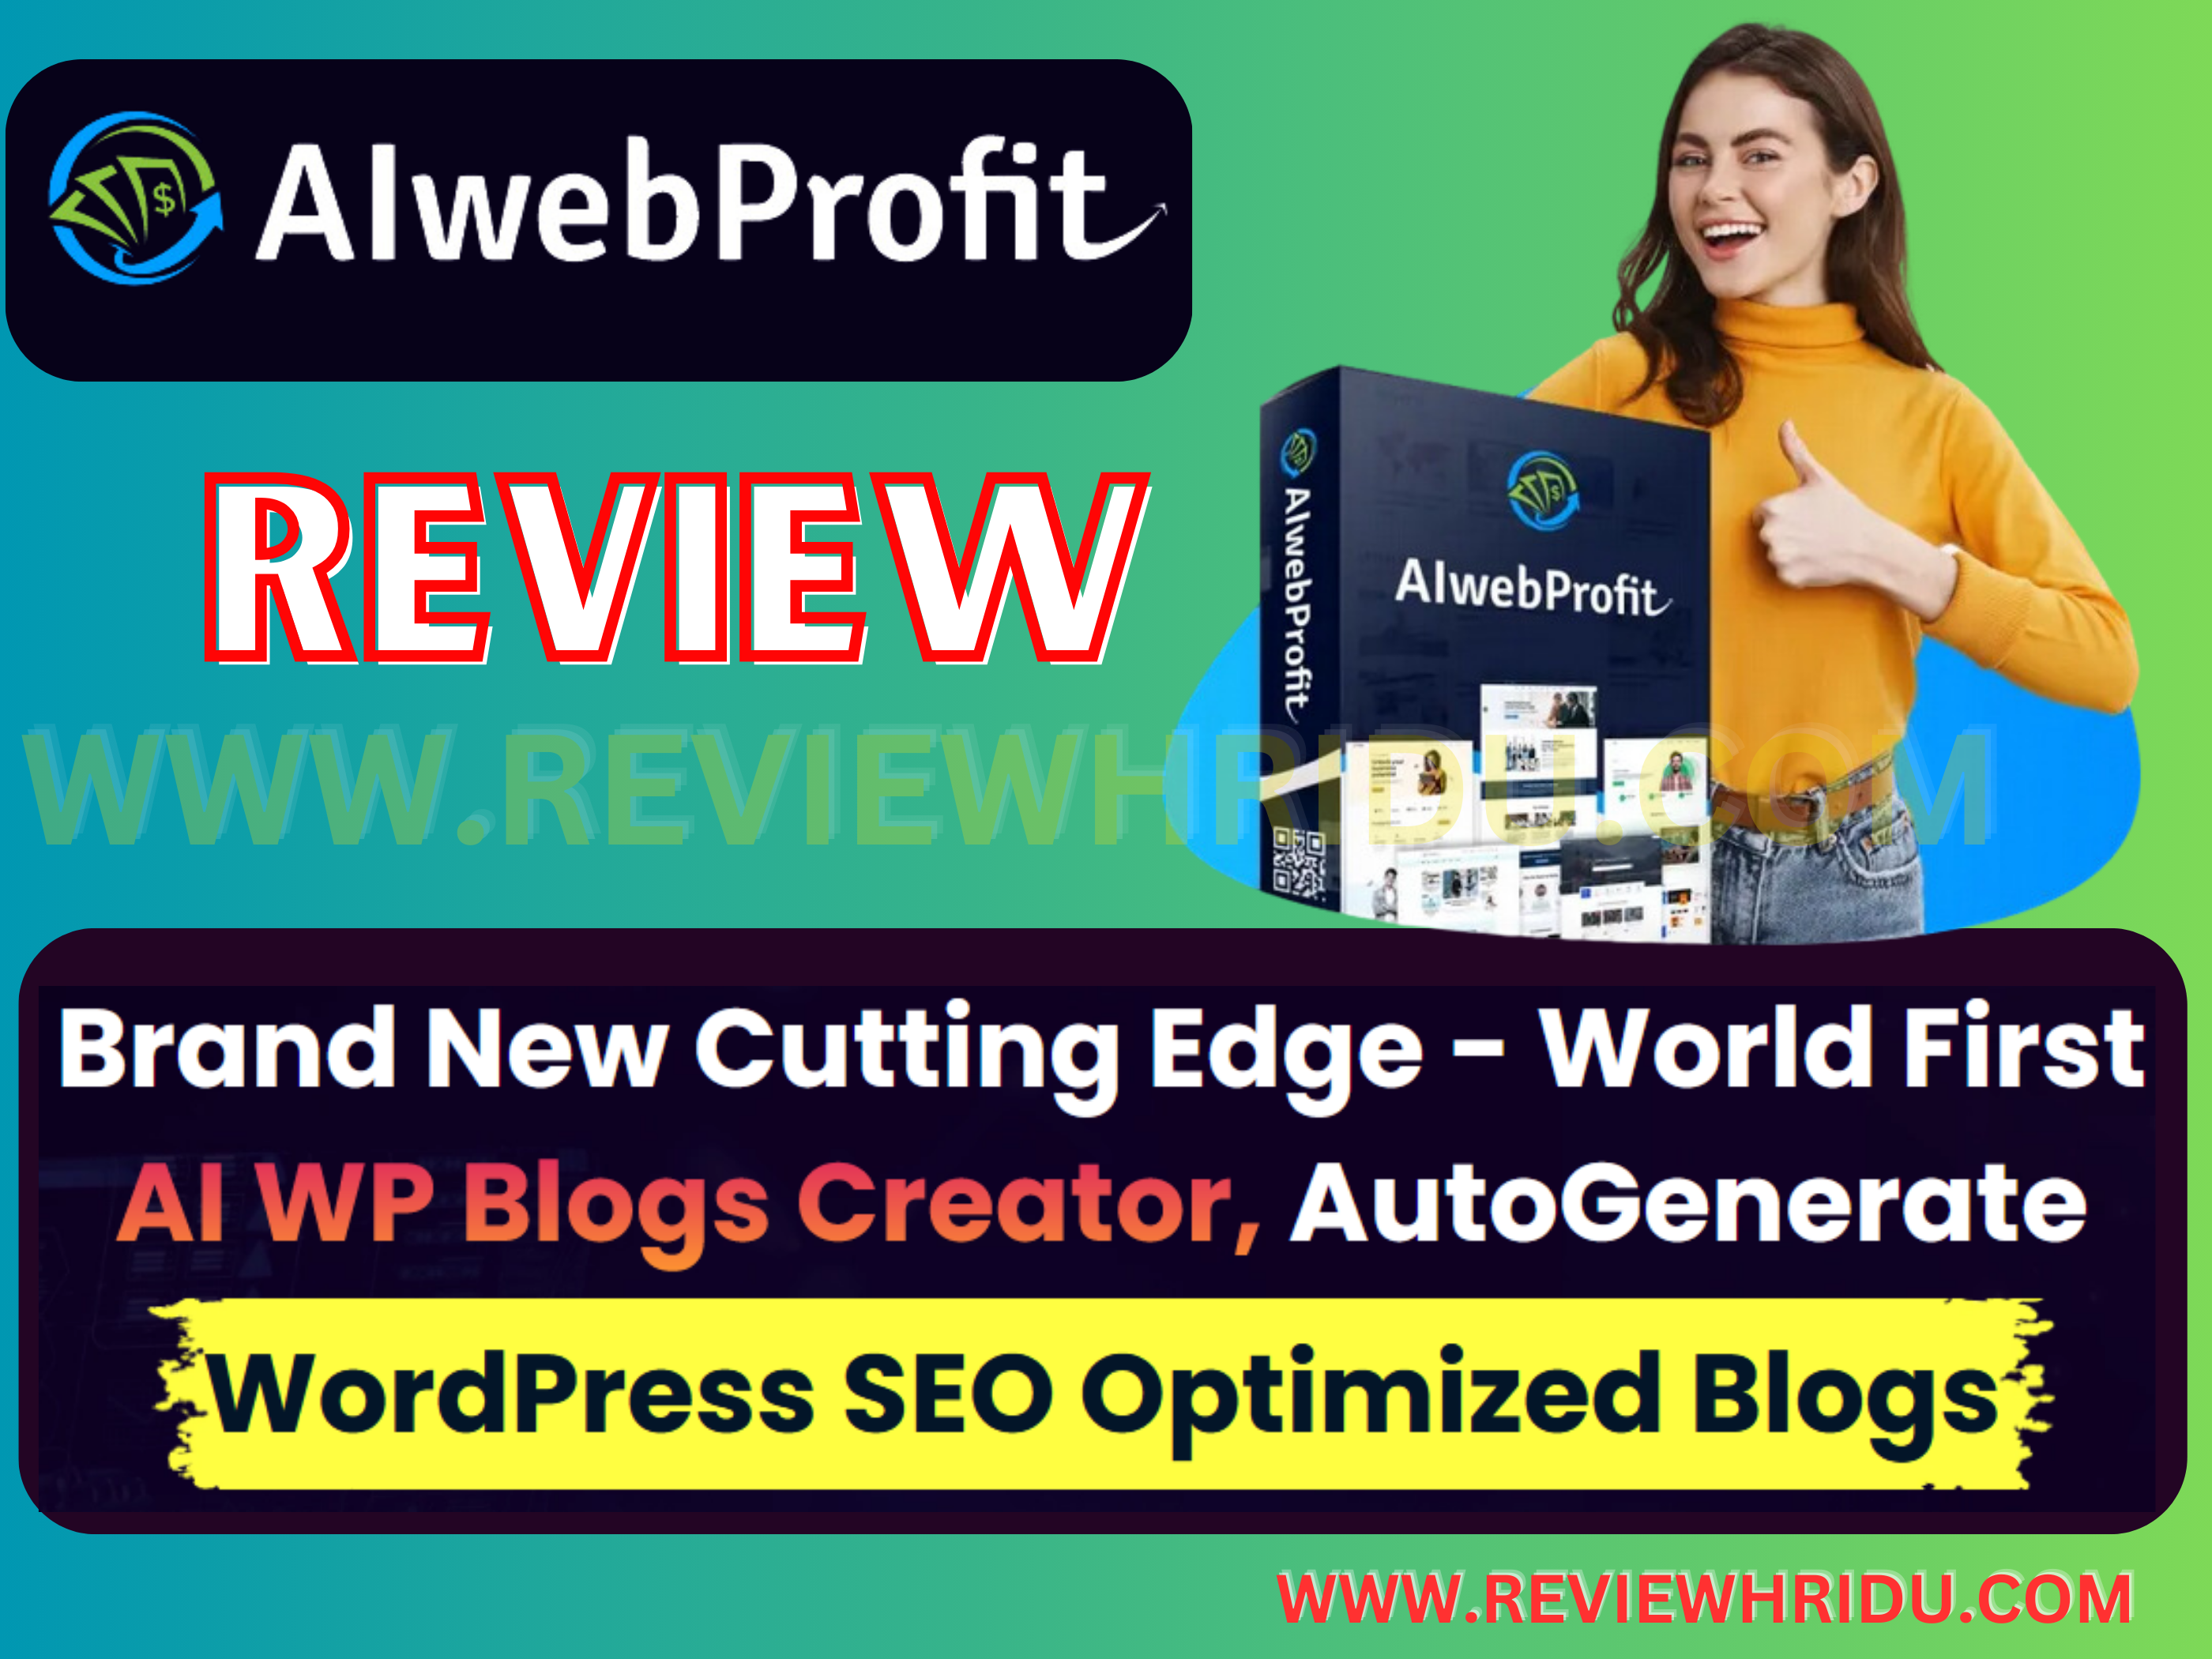 AIwebProfit Review || The Future of SEO Blog Traffic is Here 🔮